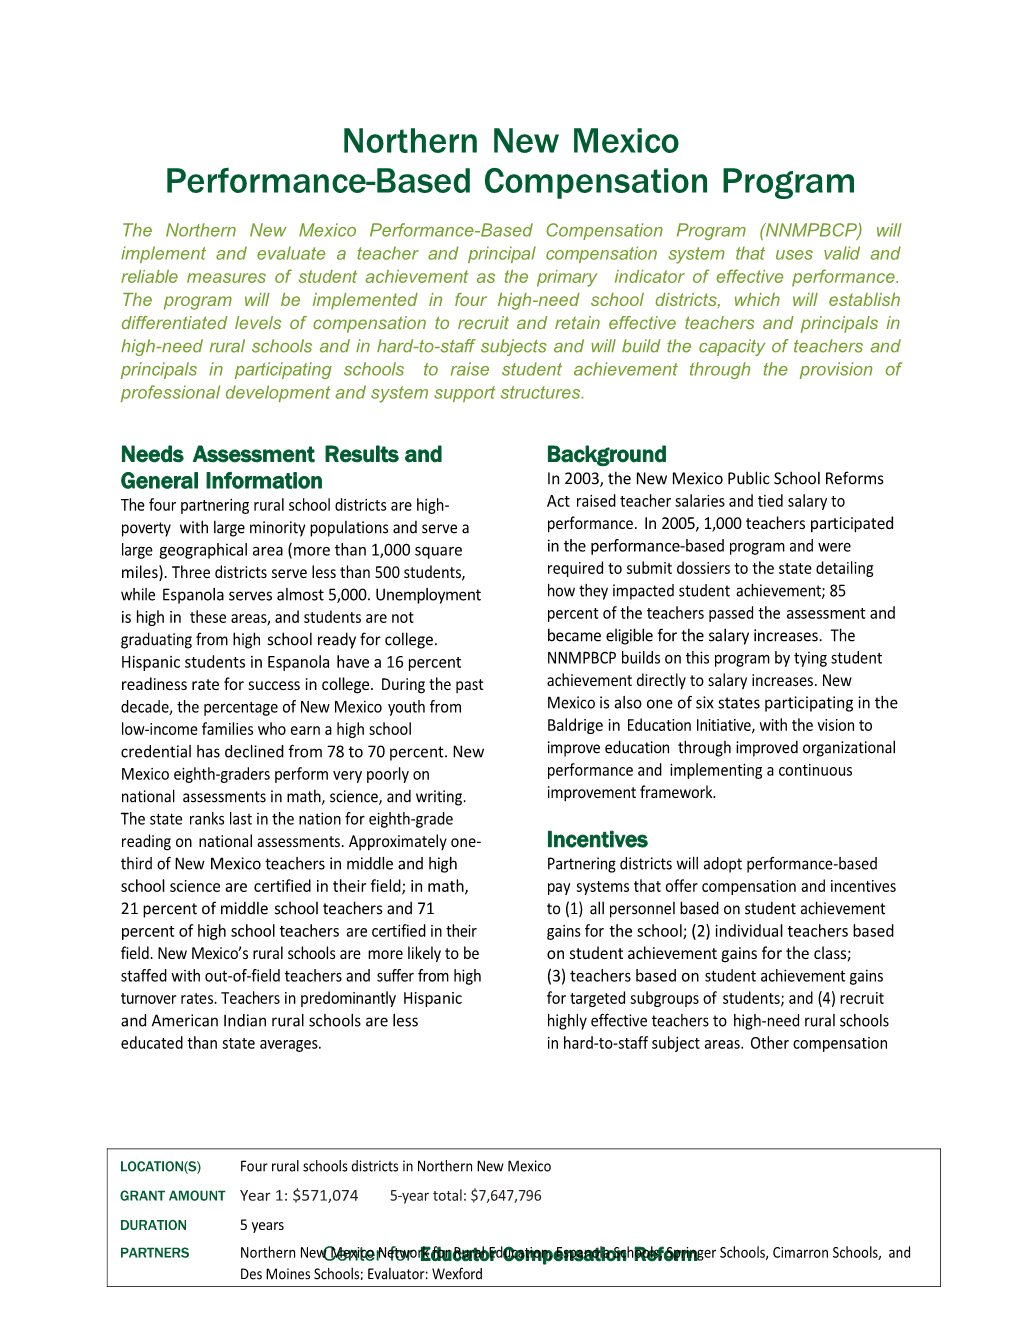 Northern New Mexico Performance-Based Comp Program (MS Word)